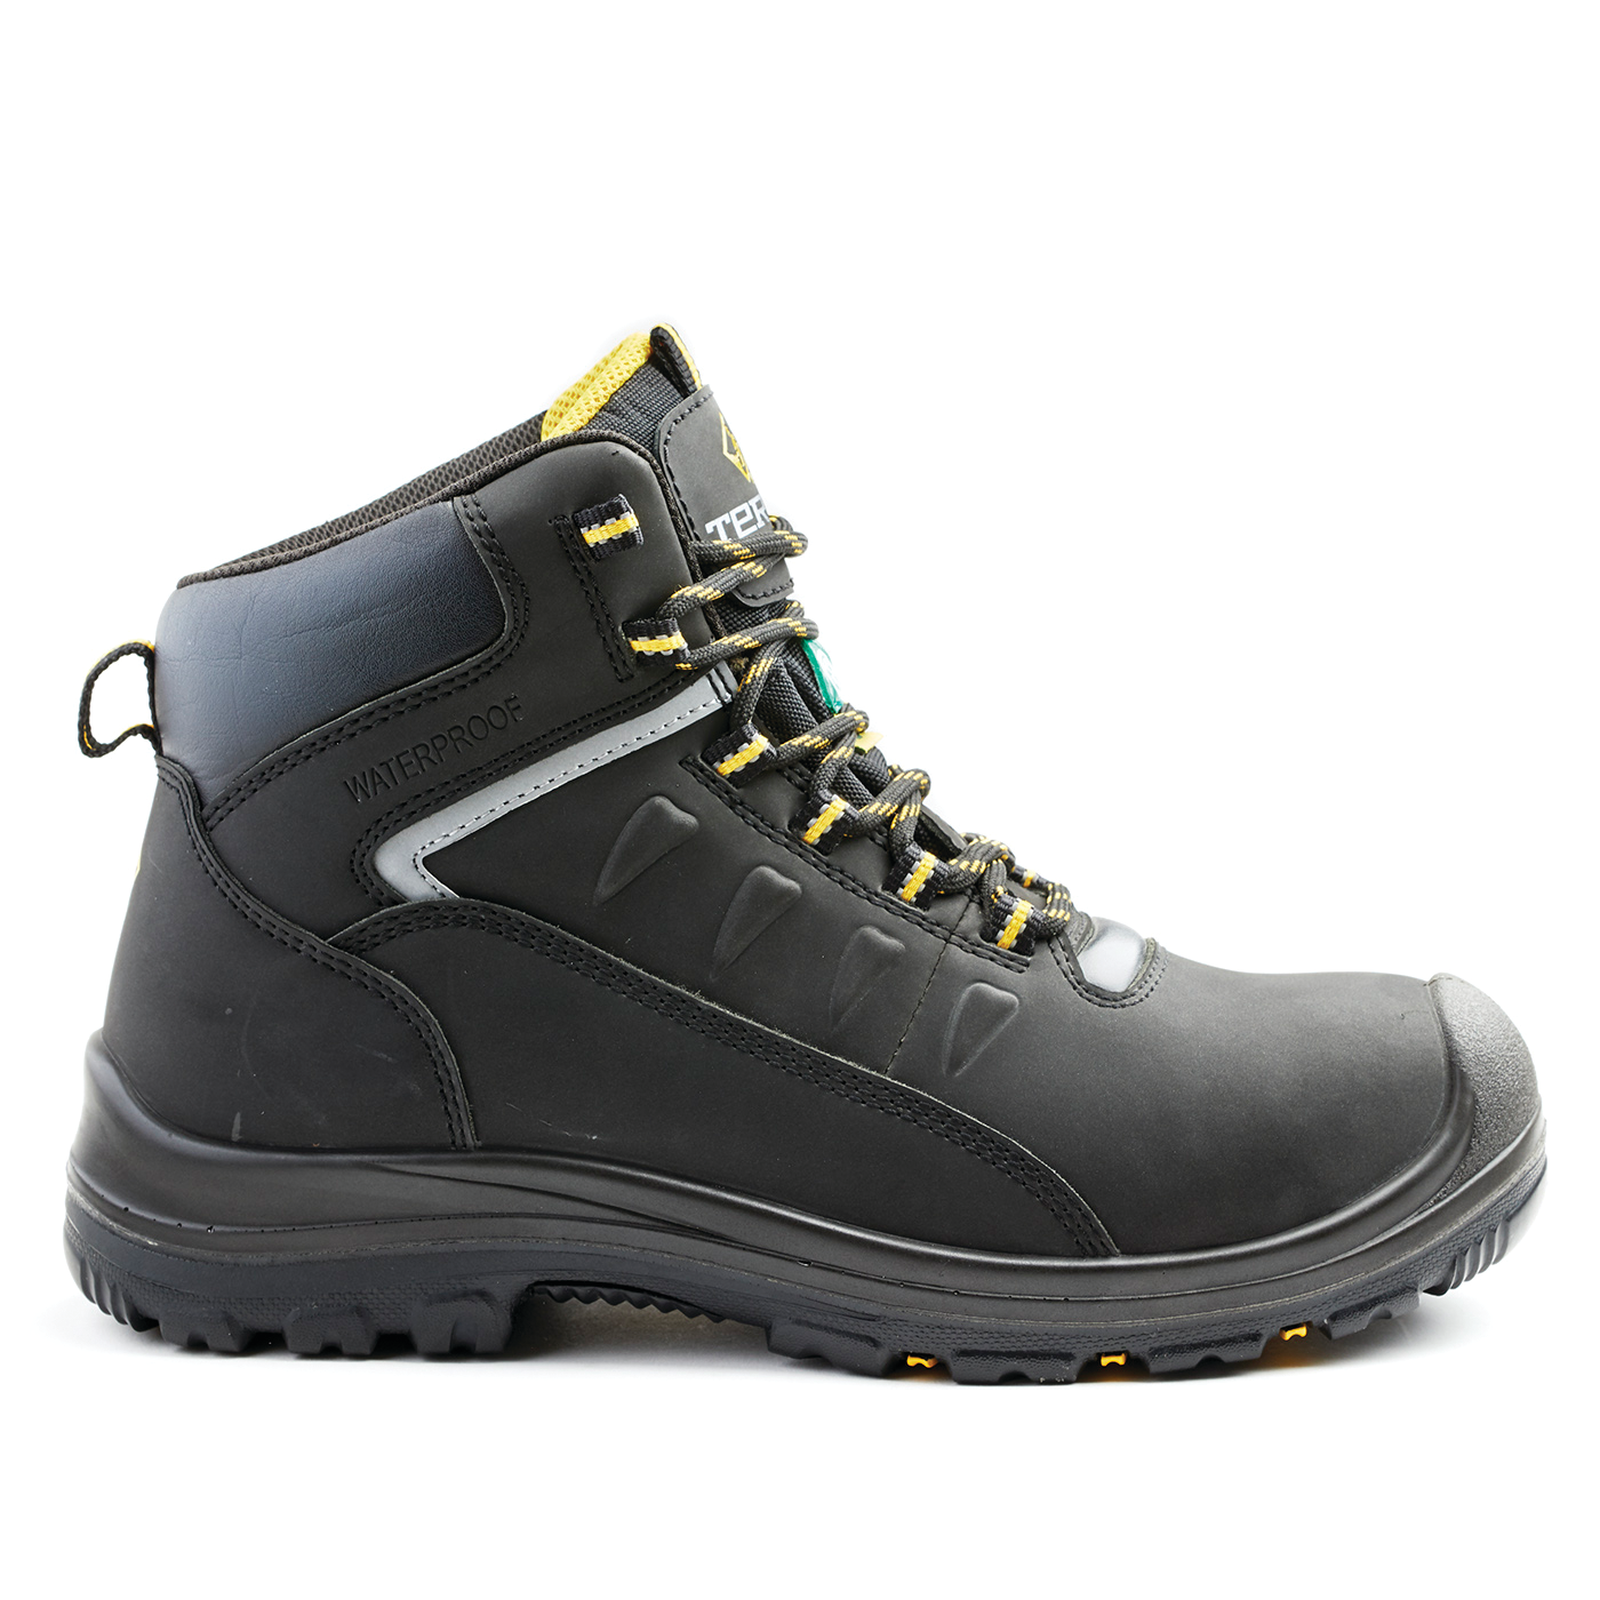 TERRA FINDLAY - Men's Work Boots and Safety Shoes | Yellow Shoes